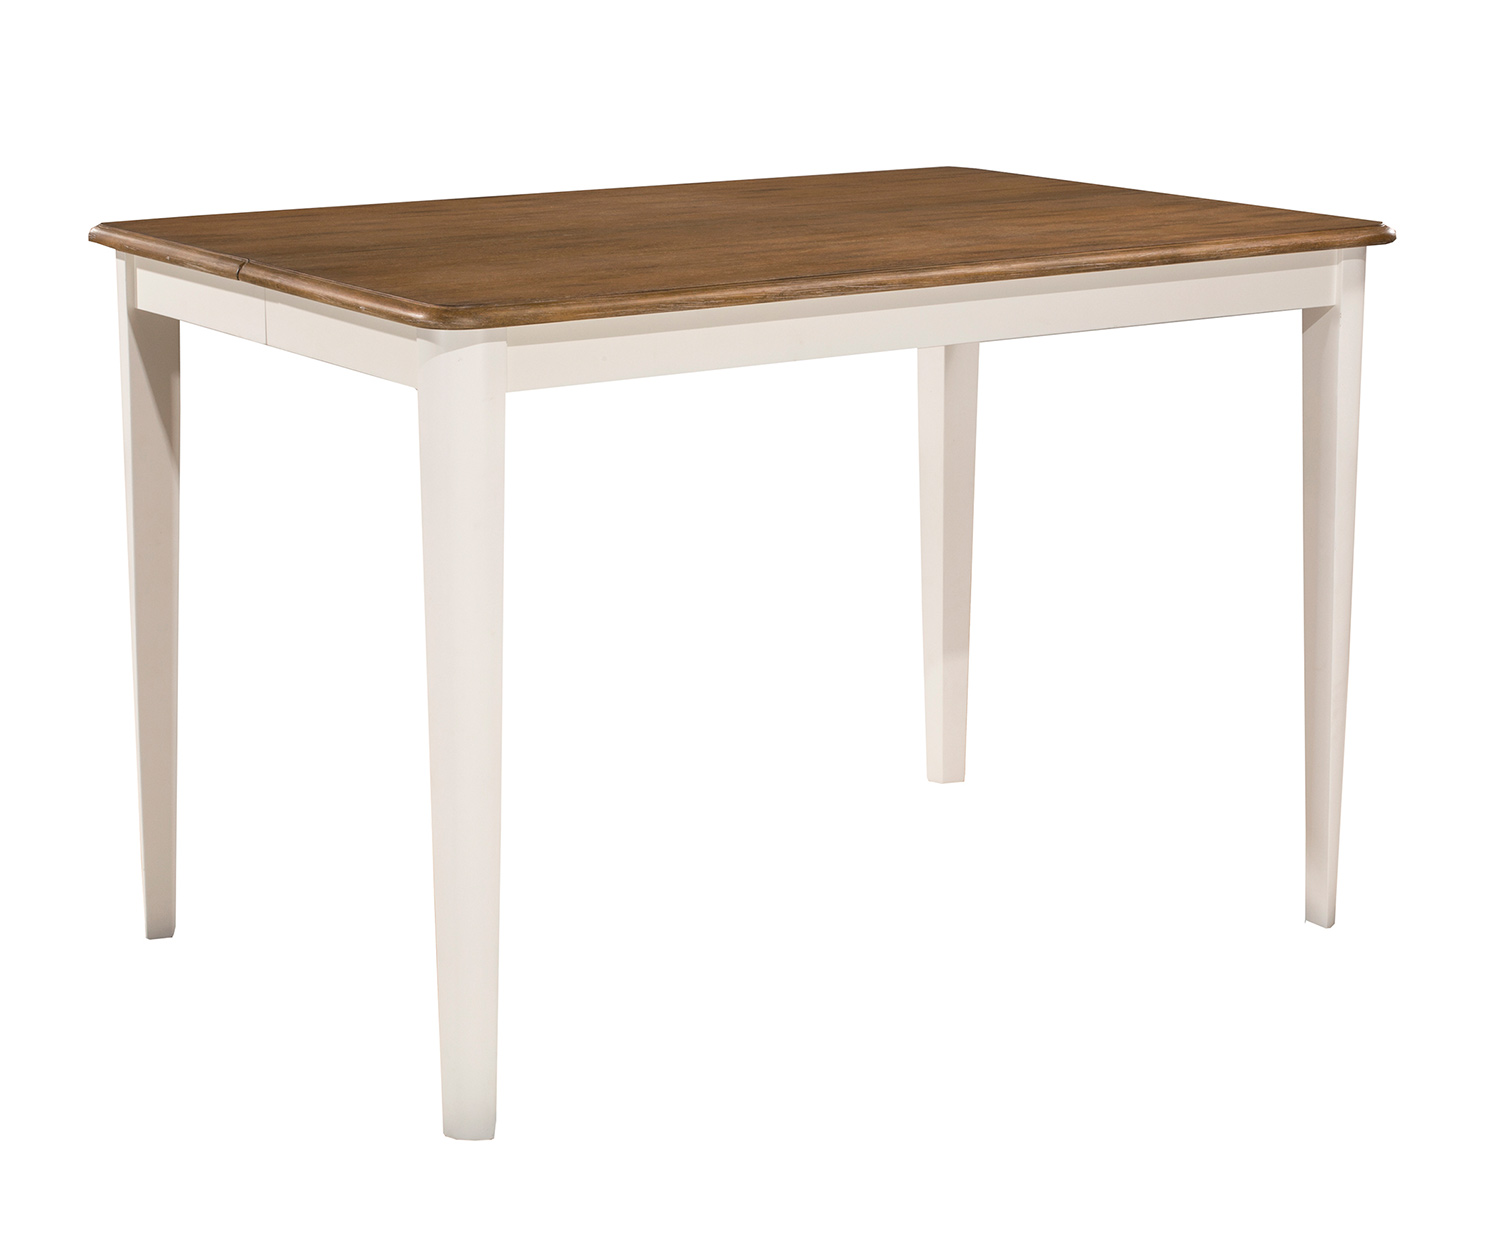 Hillsdale Bayberry Counter Height Extension Dining Table - White/Driftwood